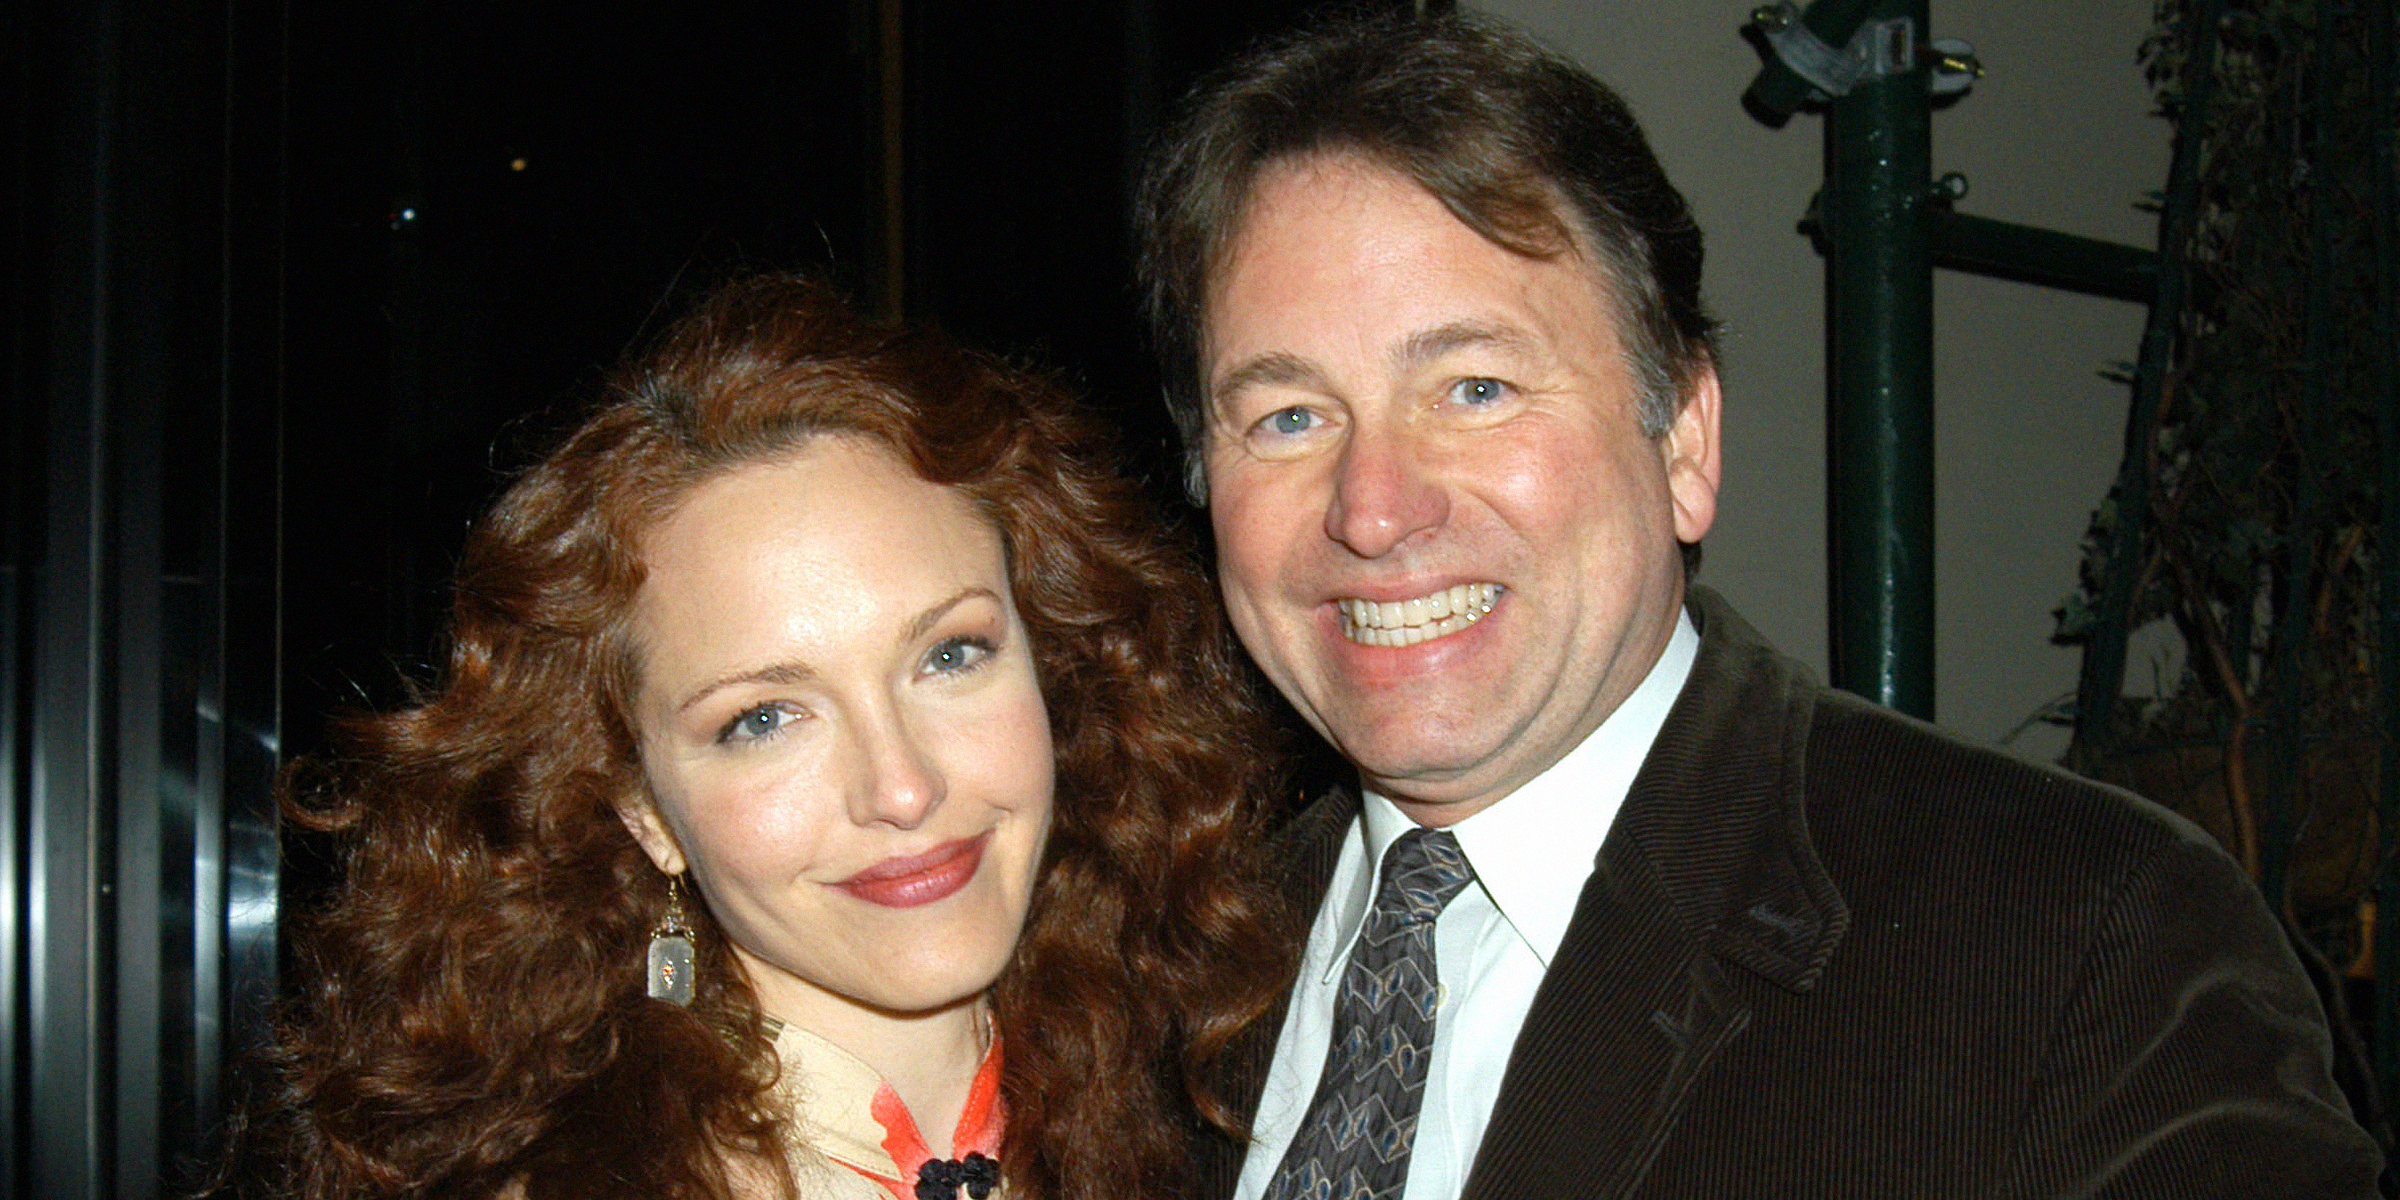 Actor John Ritter with his wife Amy Yasbeck | Source: Getty Images